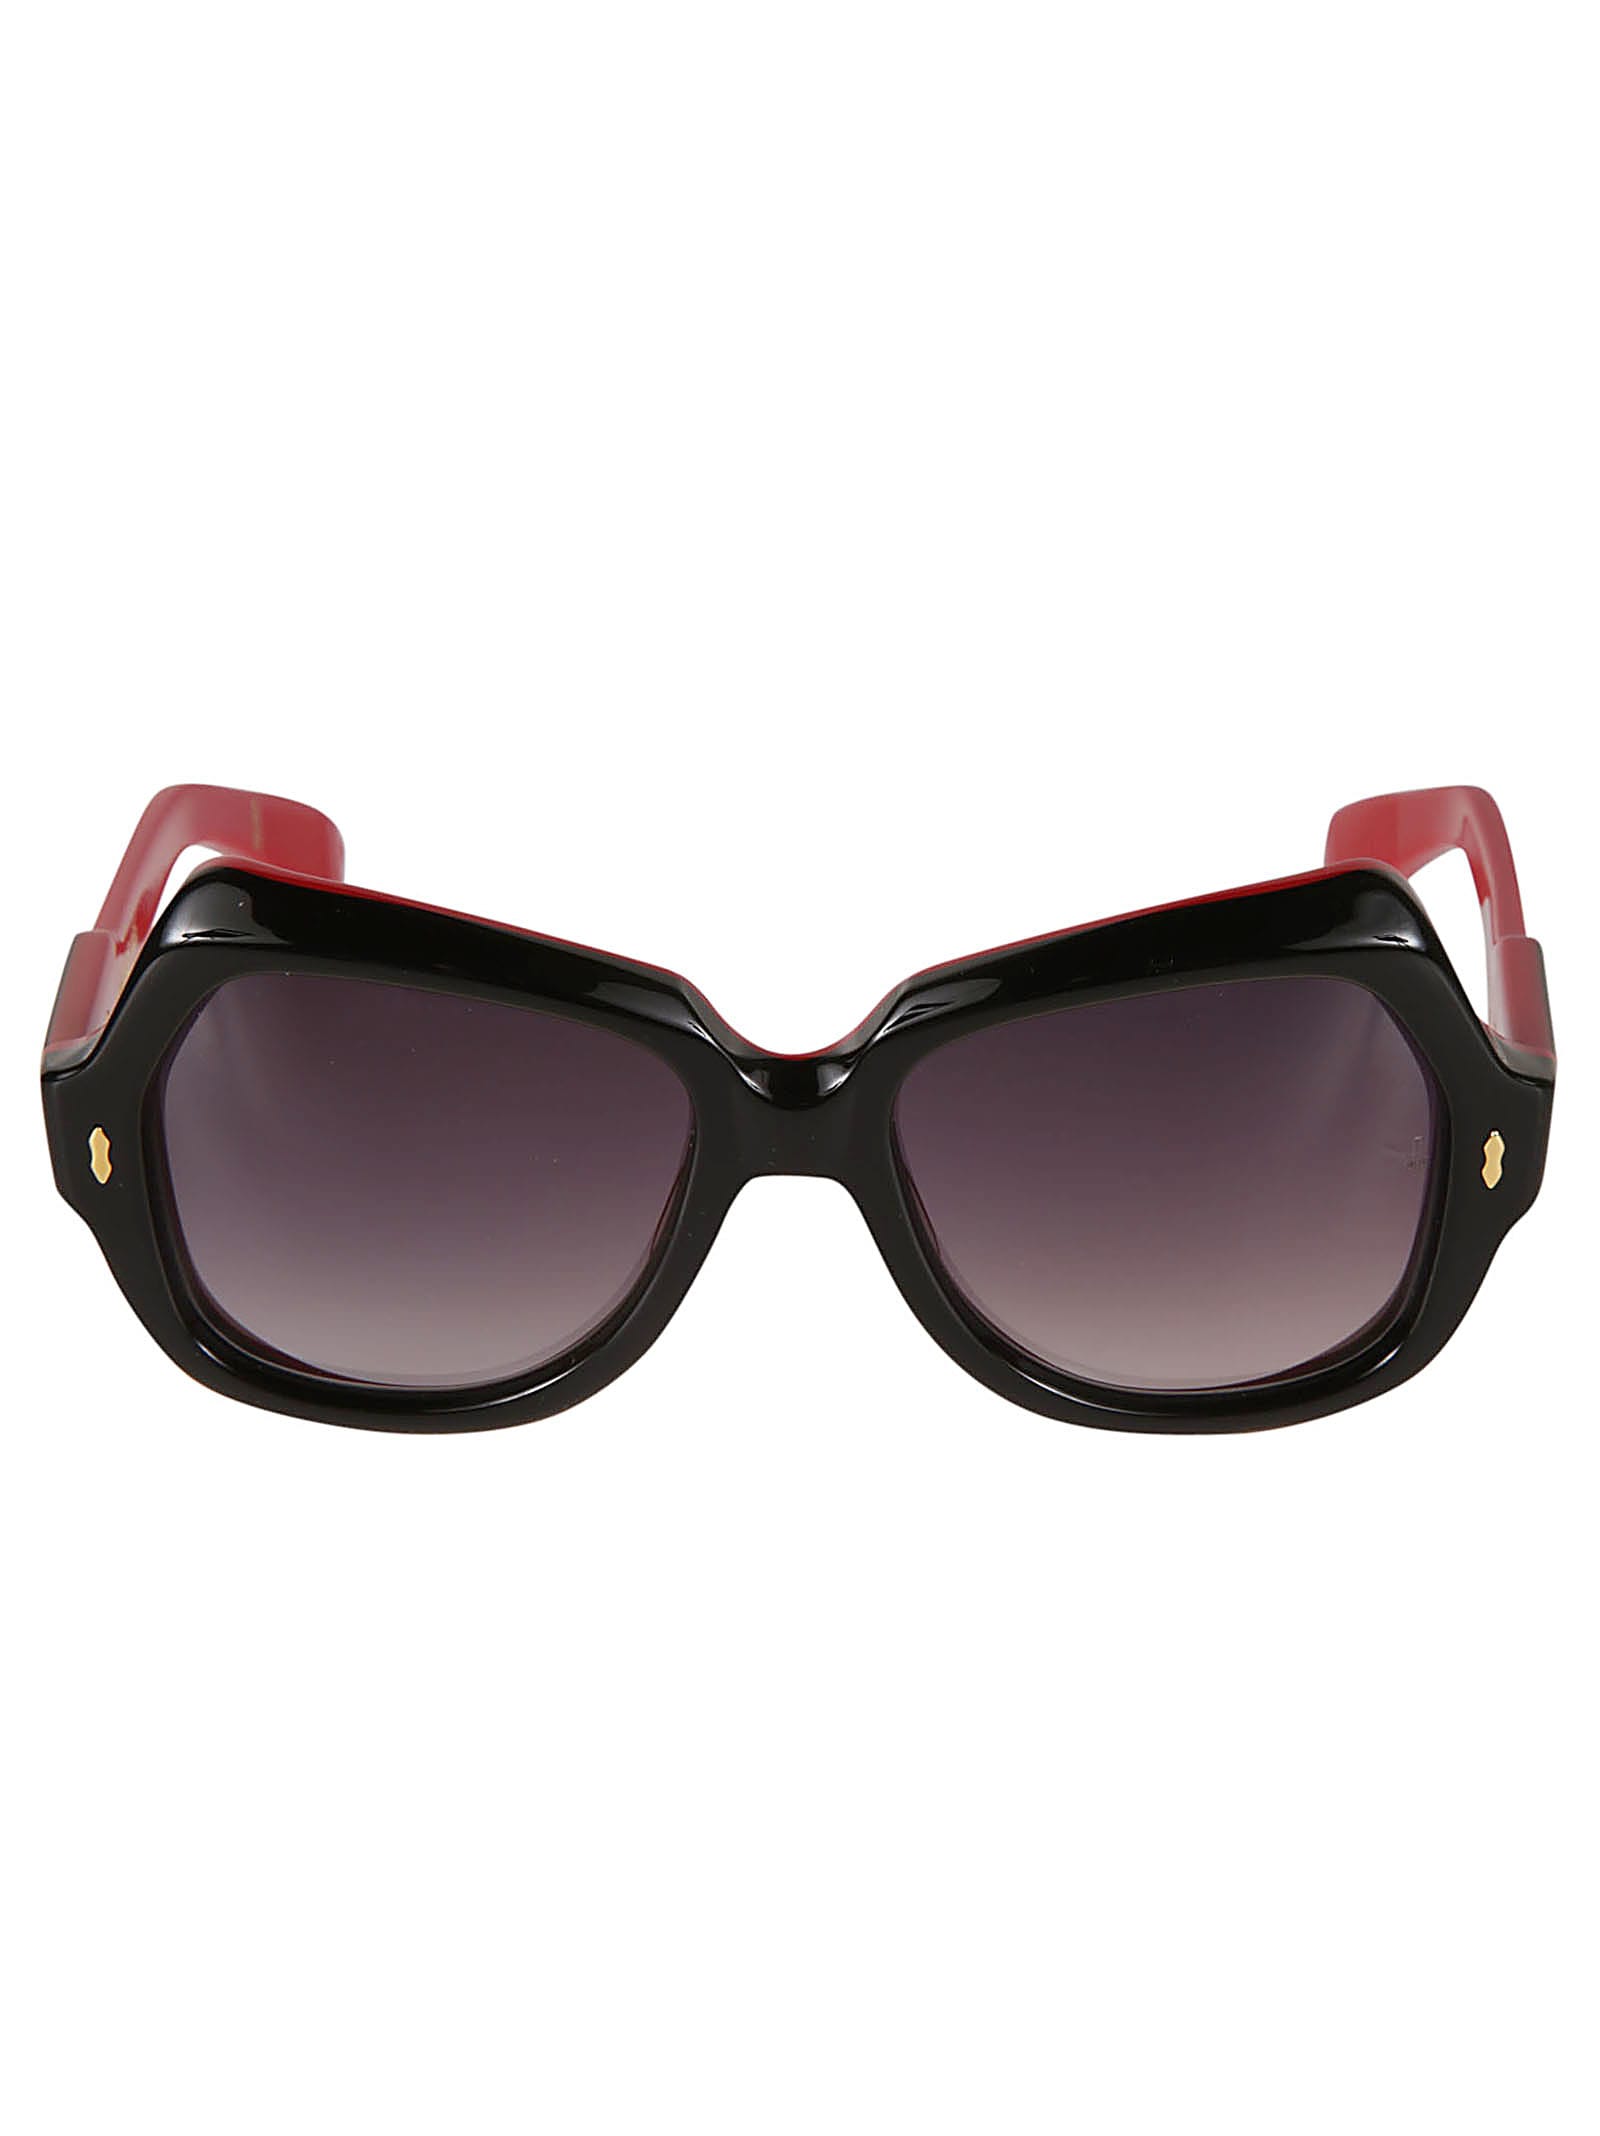 Jacques Marie Mage Square Thick Sunglasses In Black